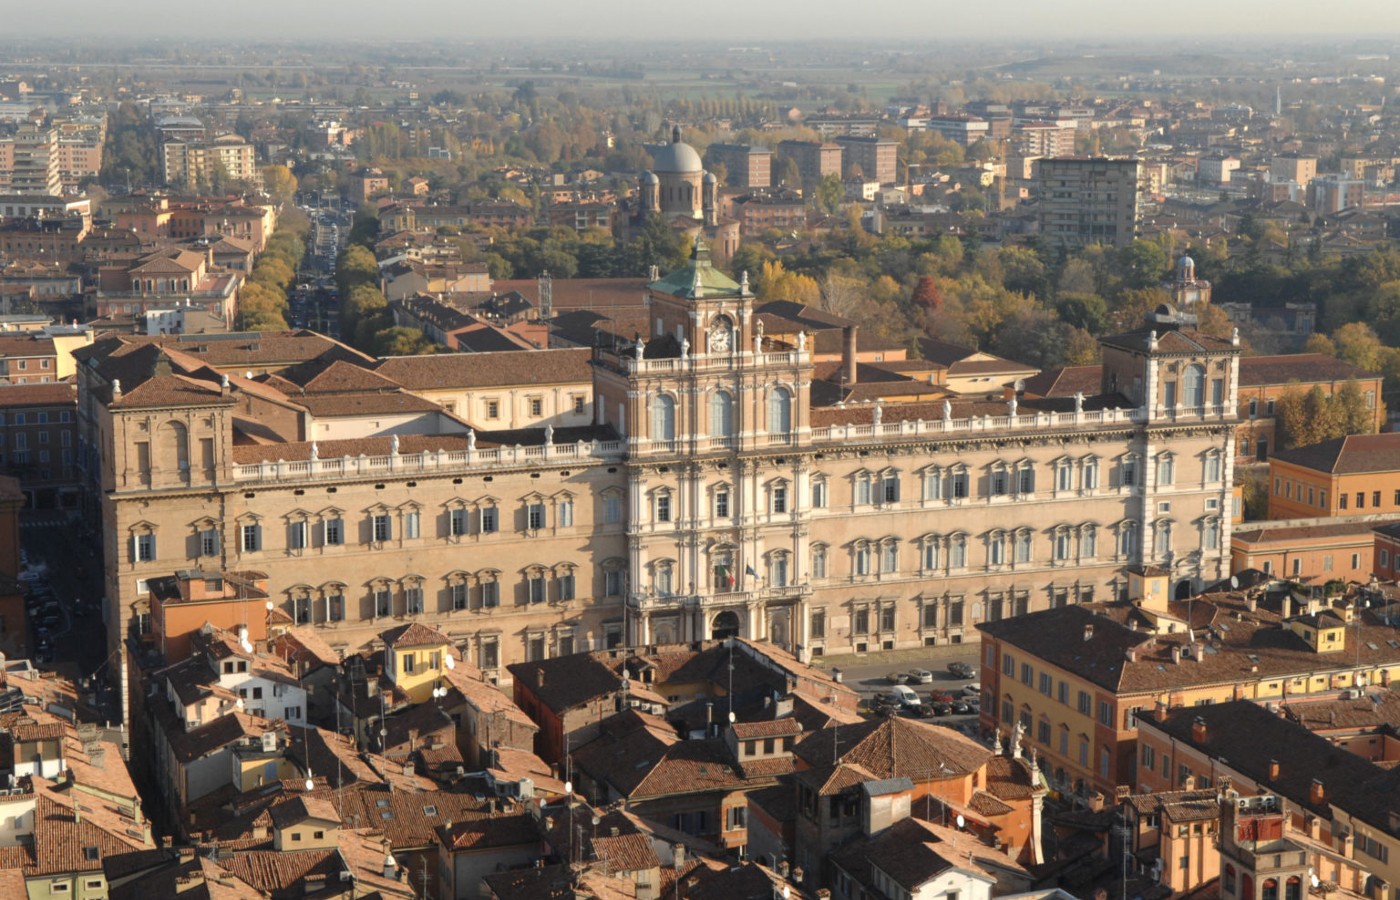 Modena, Italy – Fast Cars and Slow Food, News